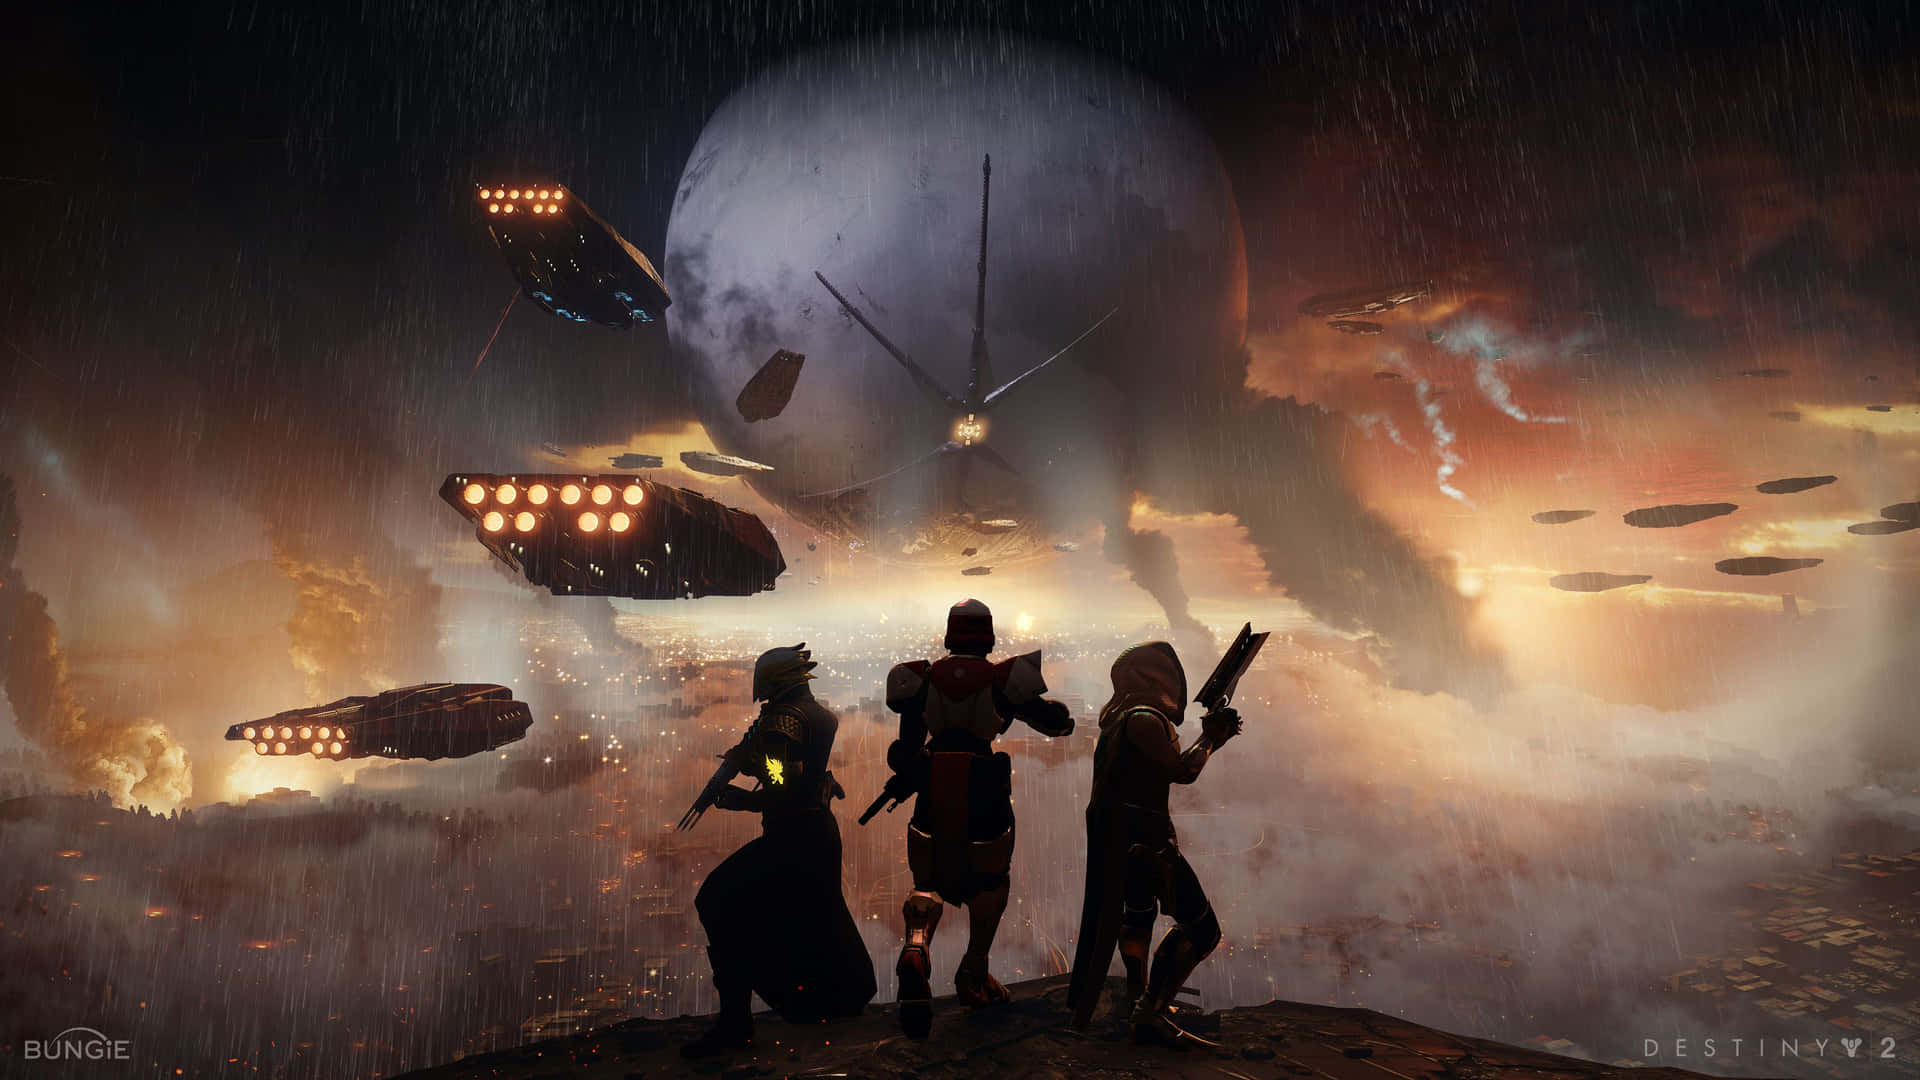 A Great Adventure Awaits in Destiny 2